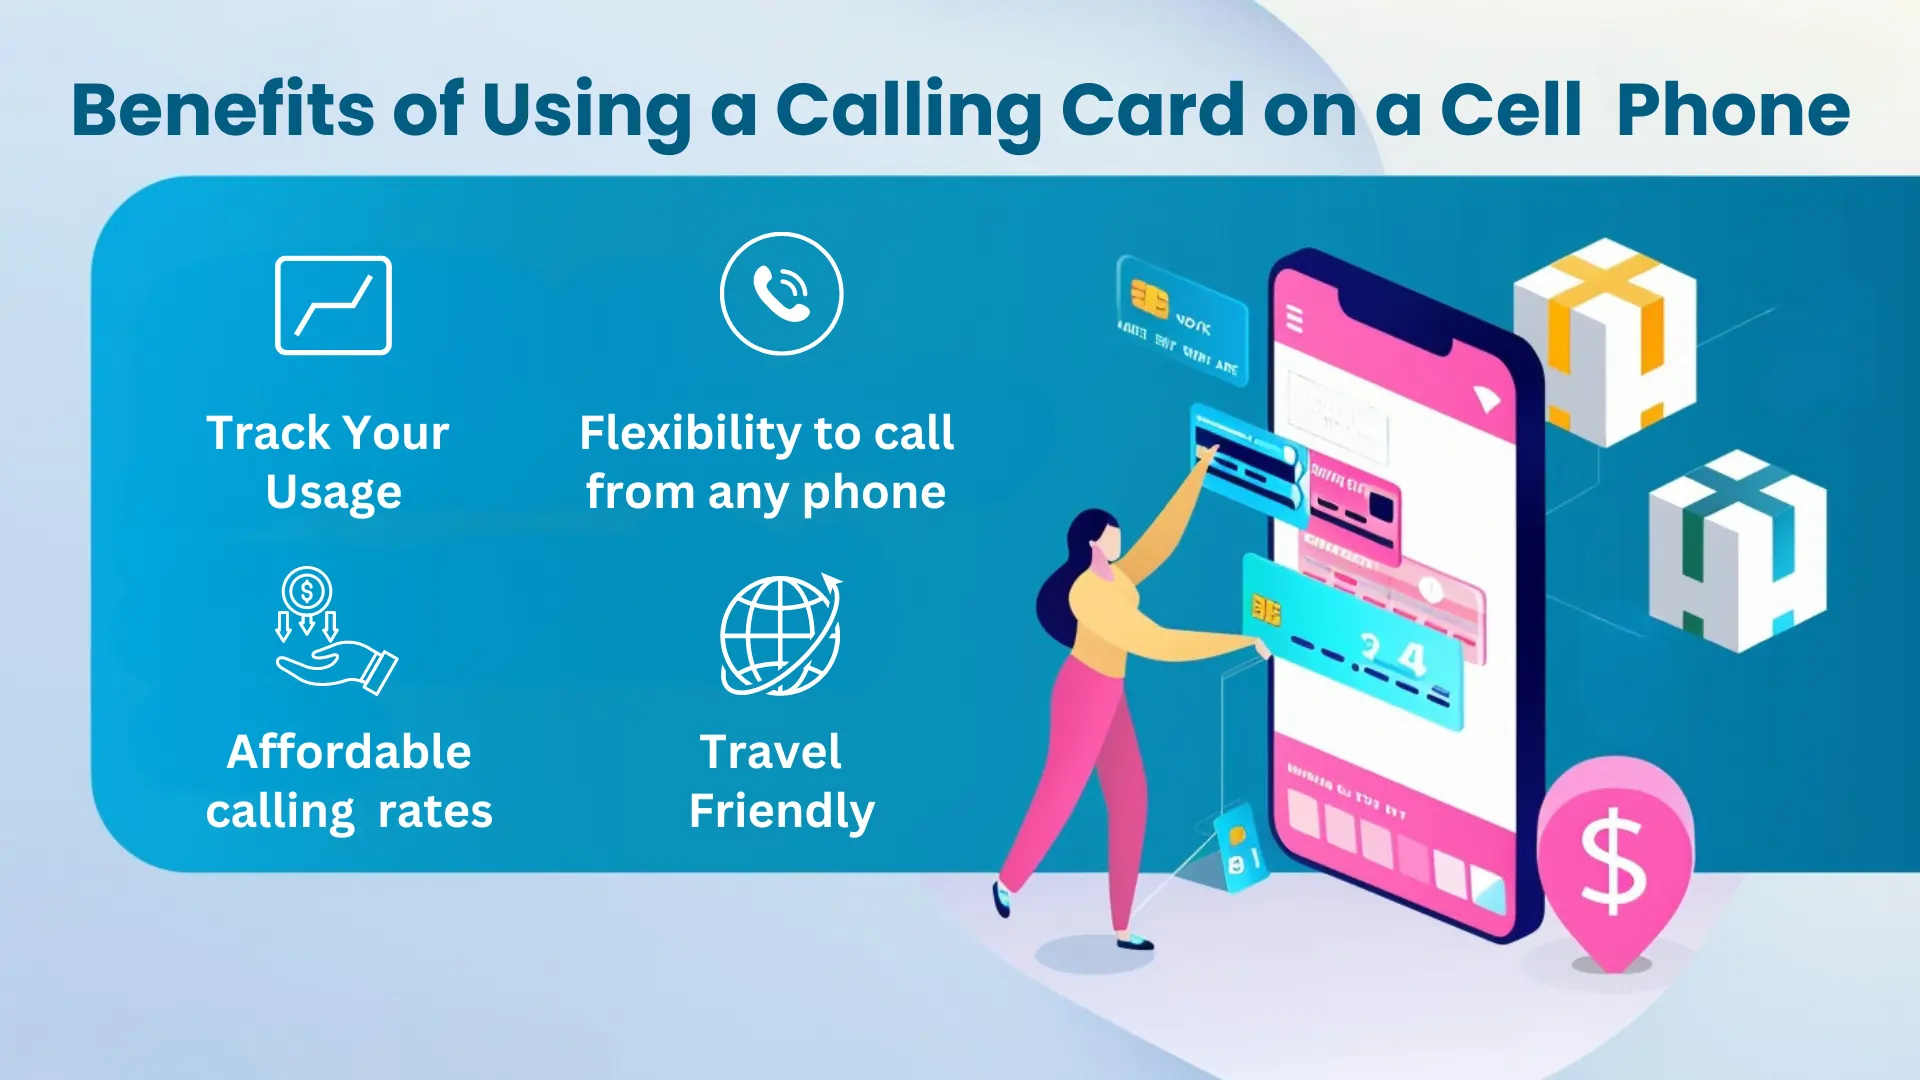 Benefits of Using a Calling Card on a Cell Phone